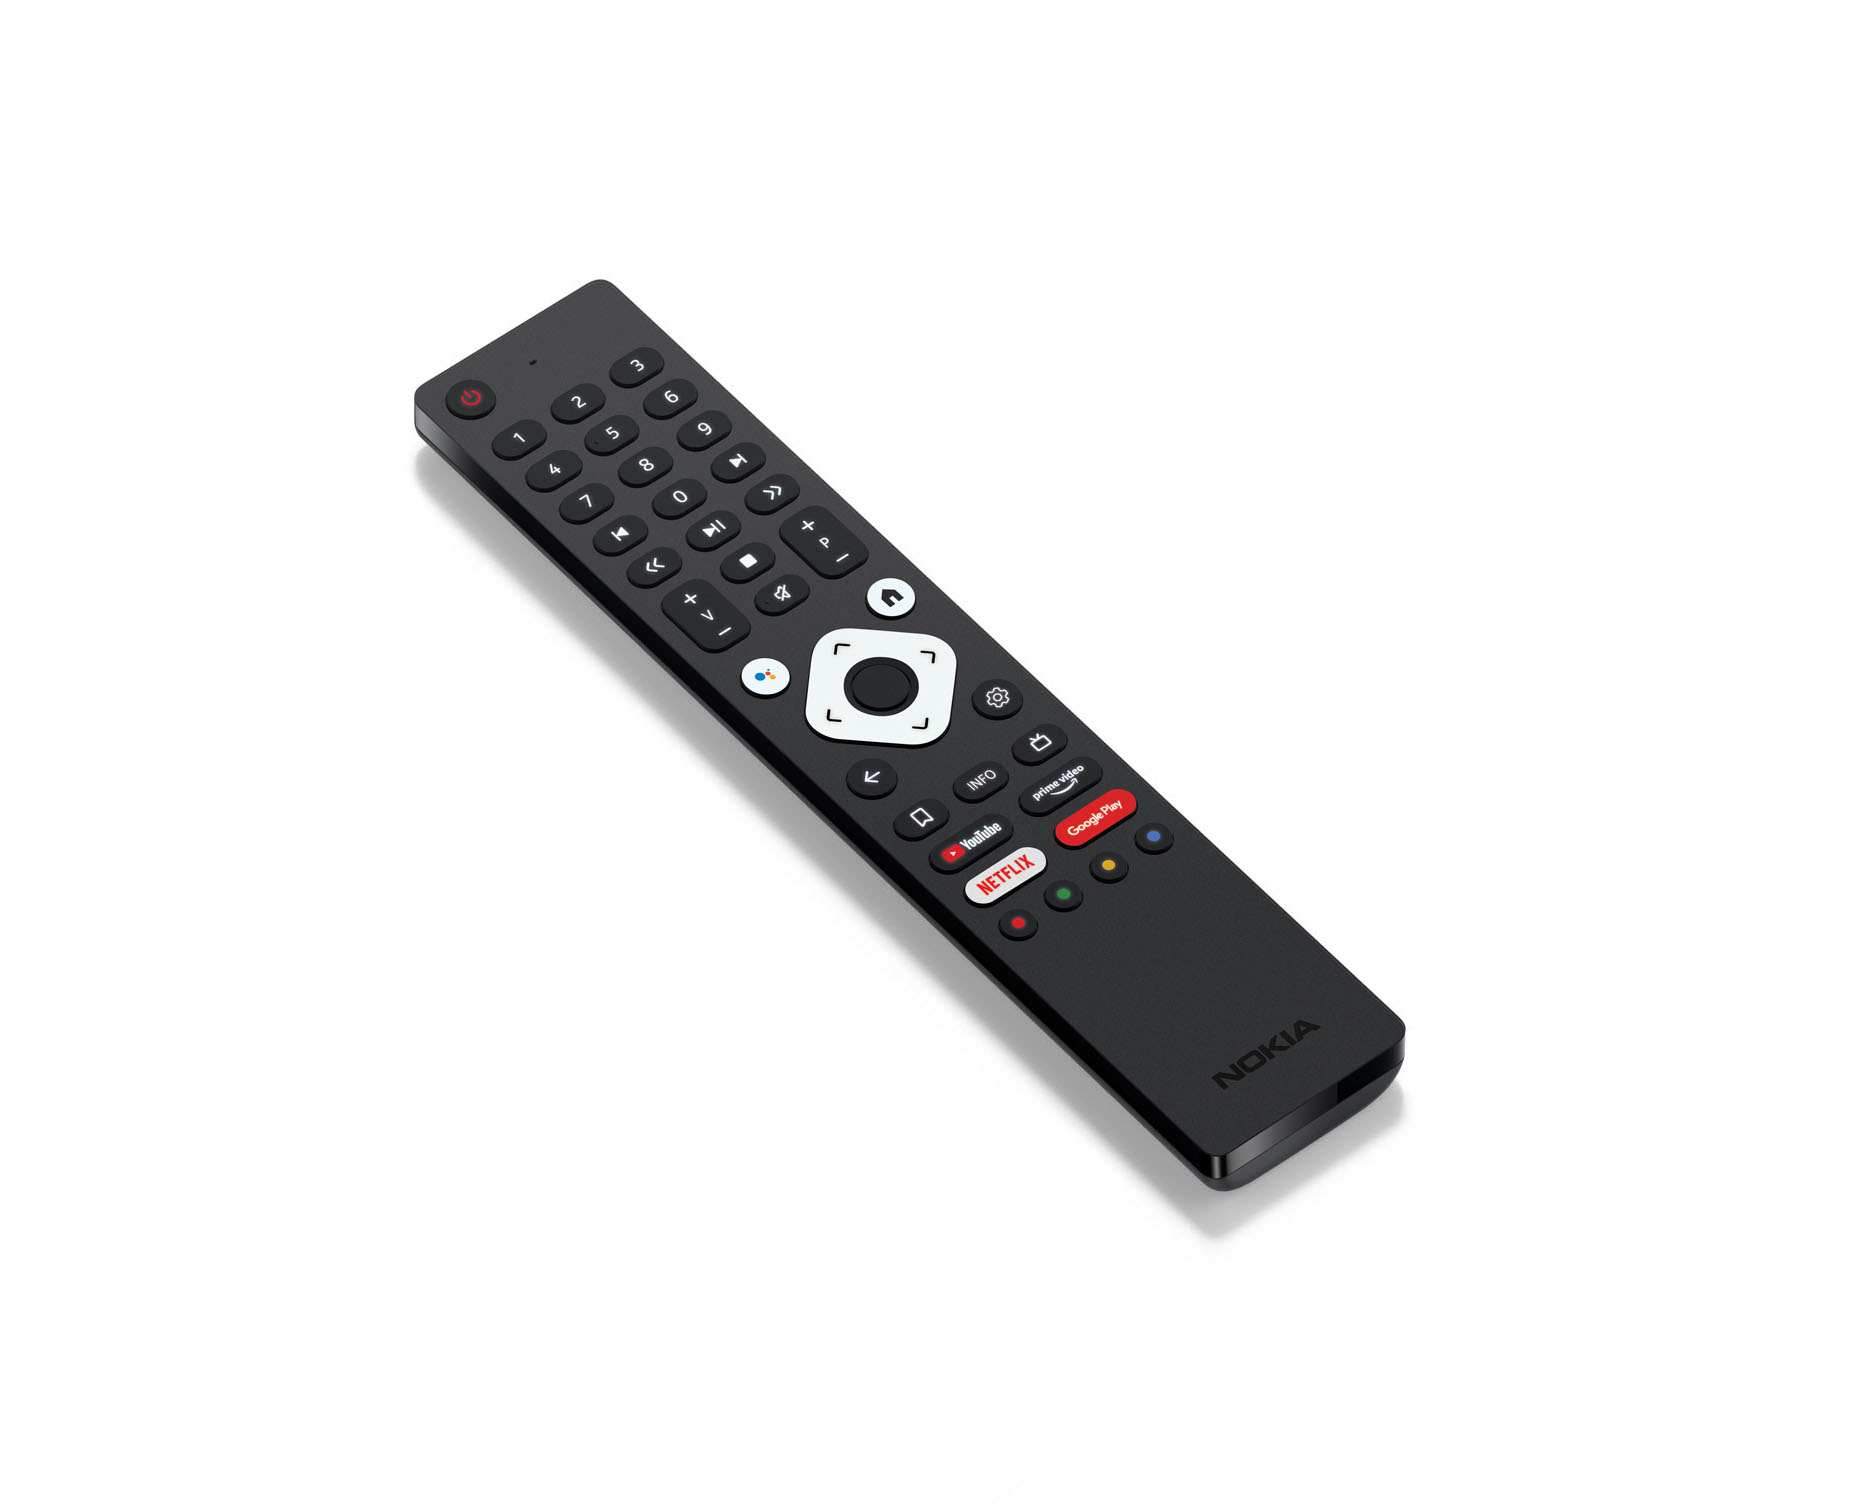 Nokia remote control for Streaming Box 8000